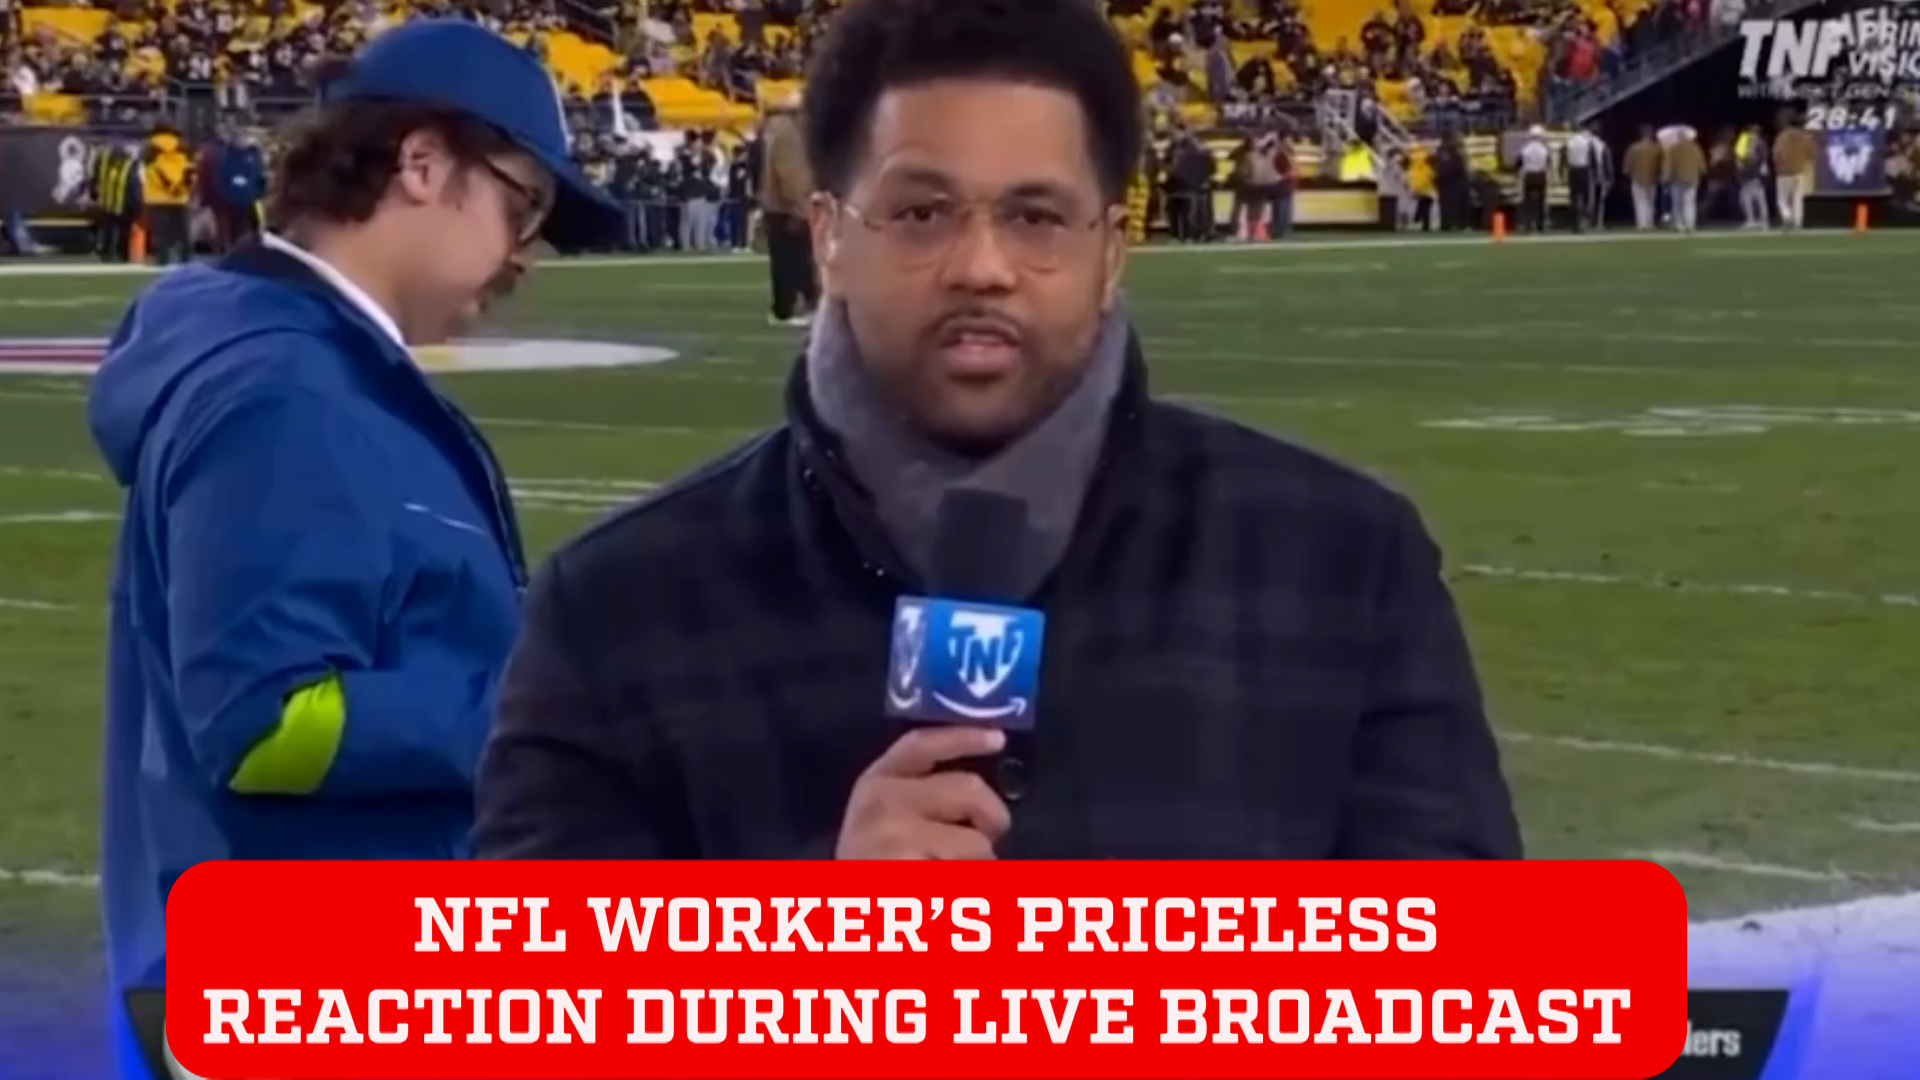 NFL employees hilarious viral reaction as he unwittingly photobombs live TV broadcast